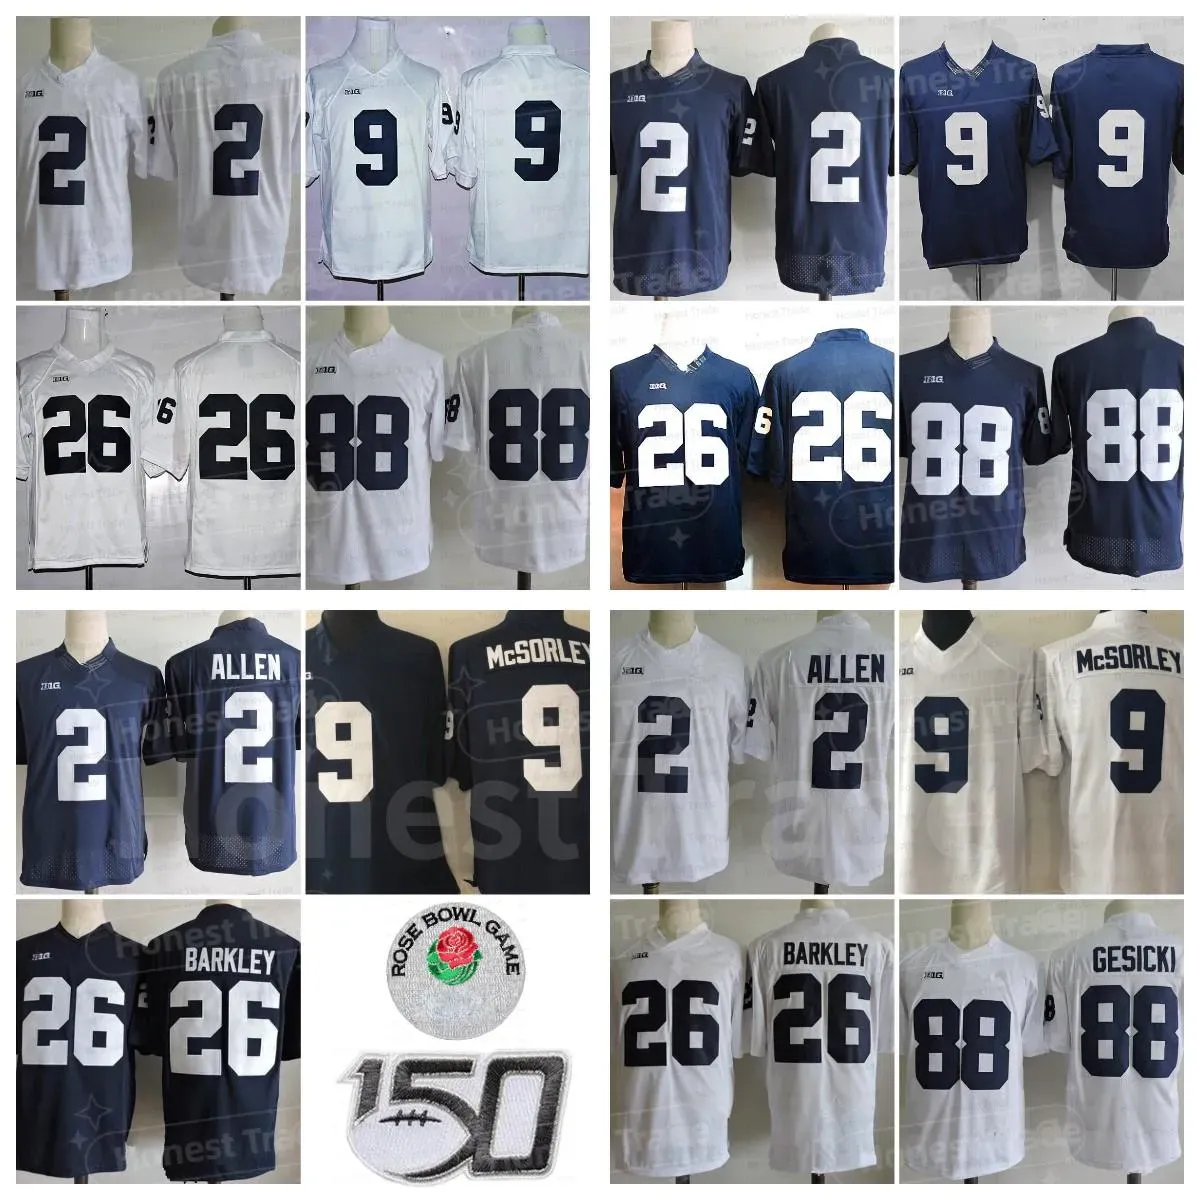 Penn State College Football 26 Saquon 9 Trace Mcsorley 88 Mike Gesicki 2 Marcus Allen Paterno Ed Maillots Blanc Marine AUCUN NOM 150e Hommes